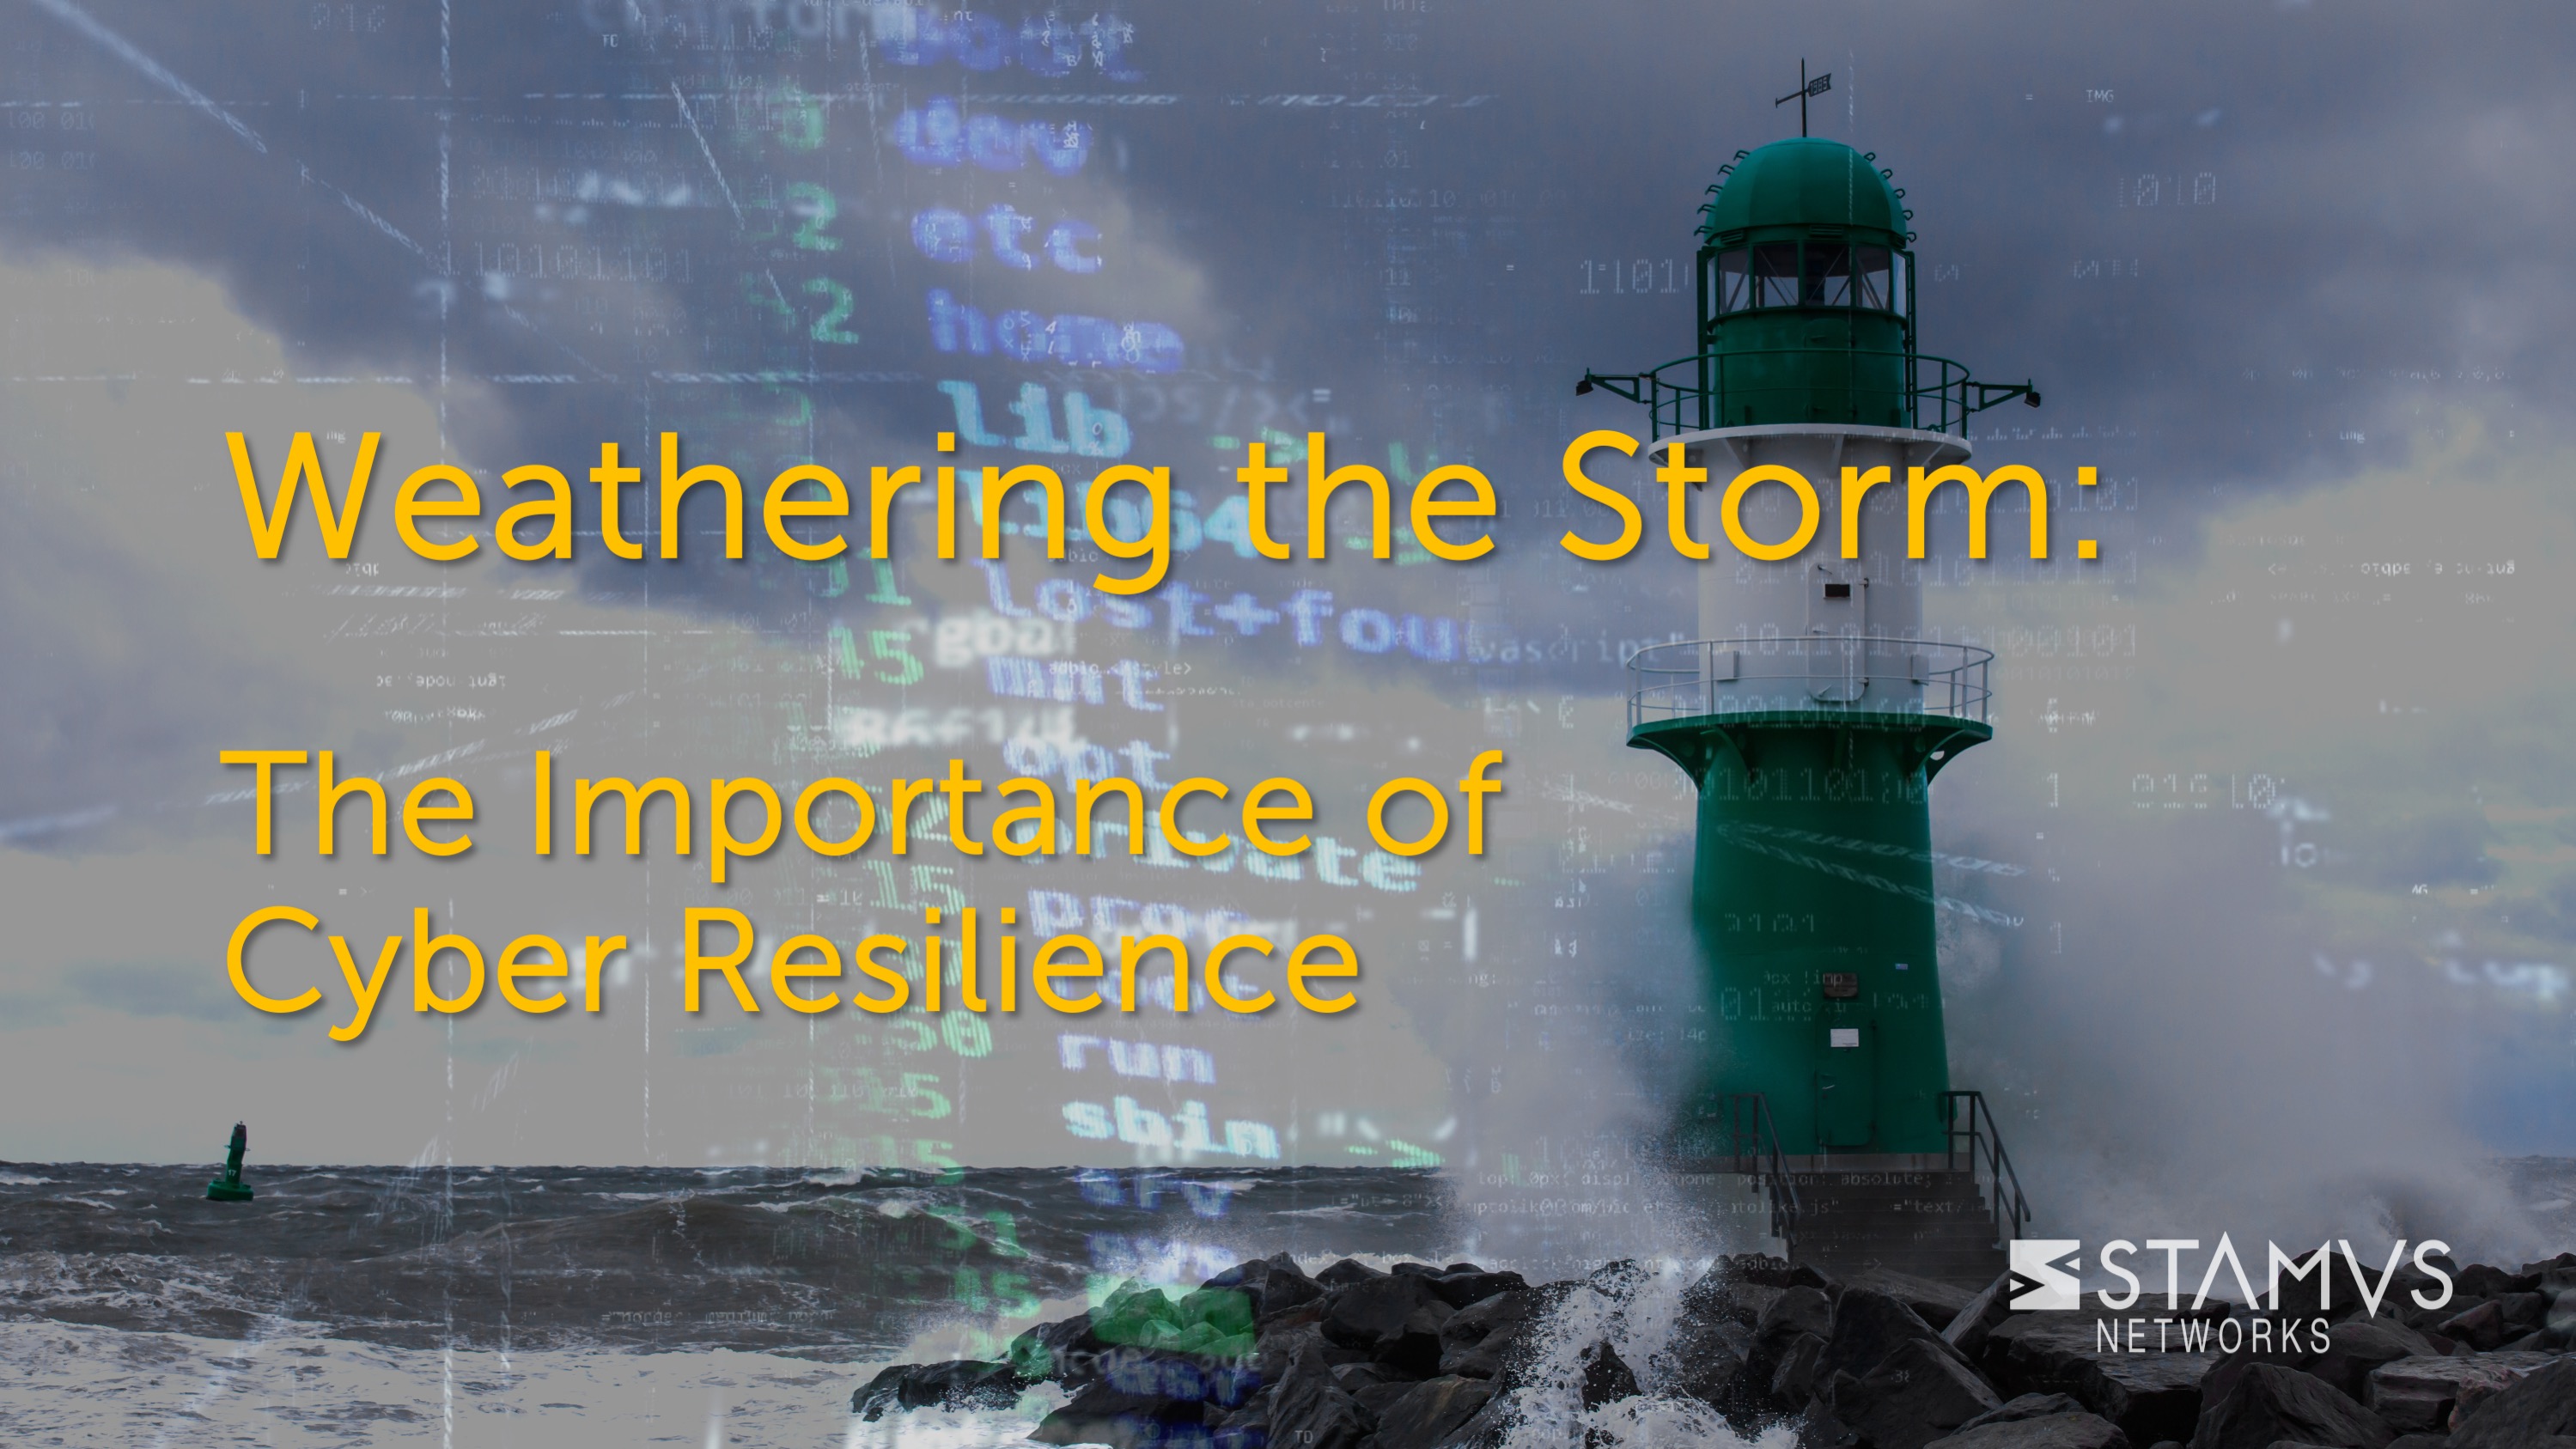 Weathering the Storm: The importance of Cyber Resilience